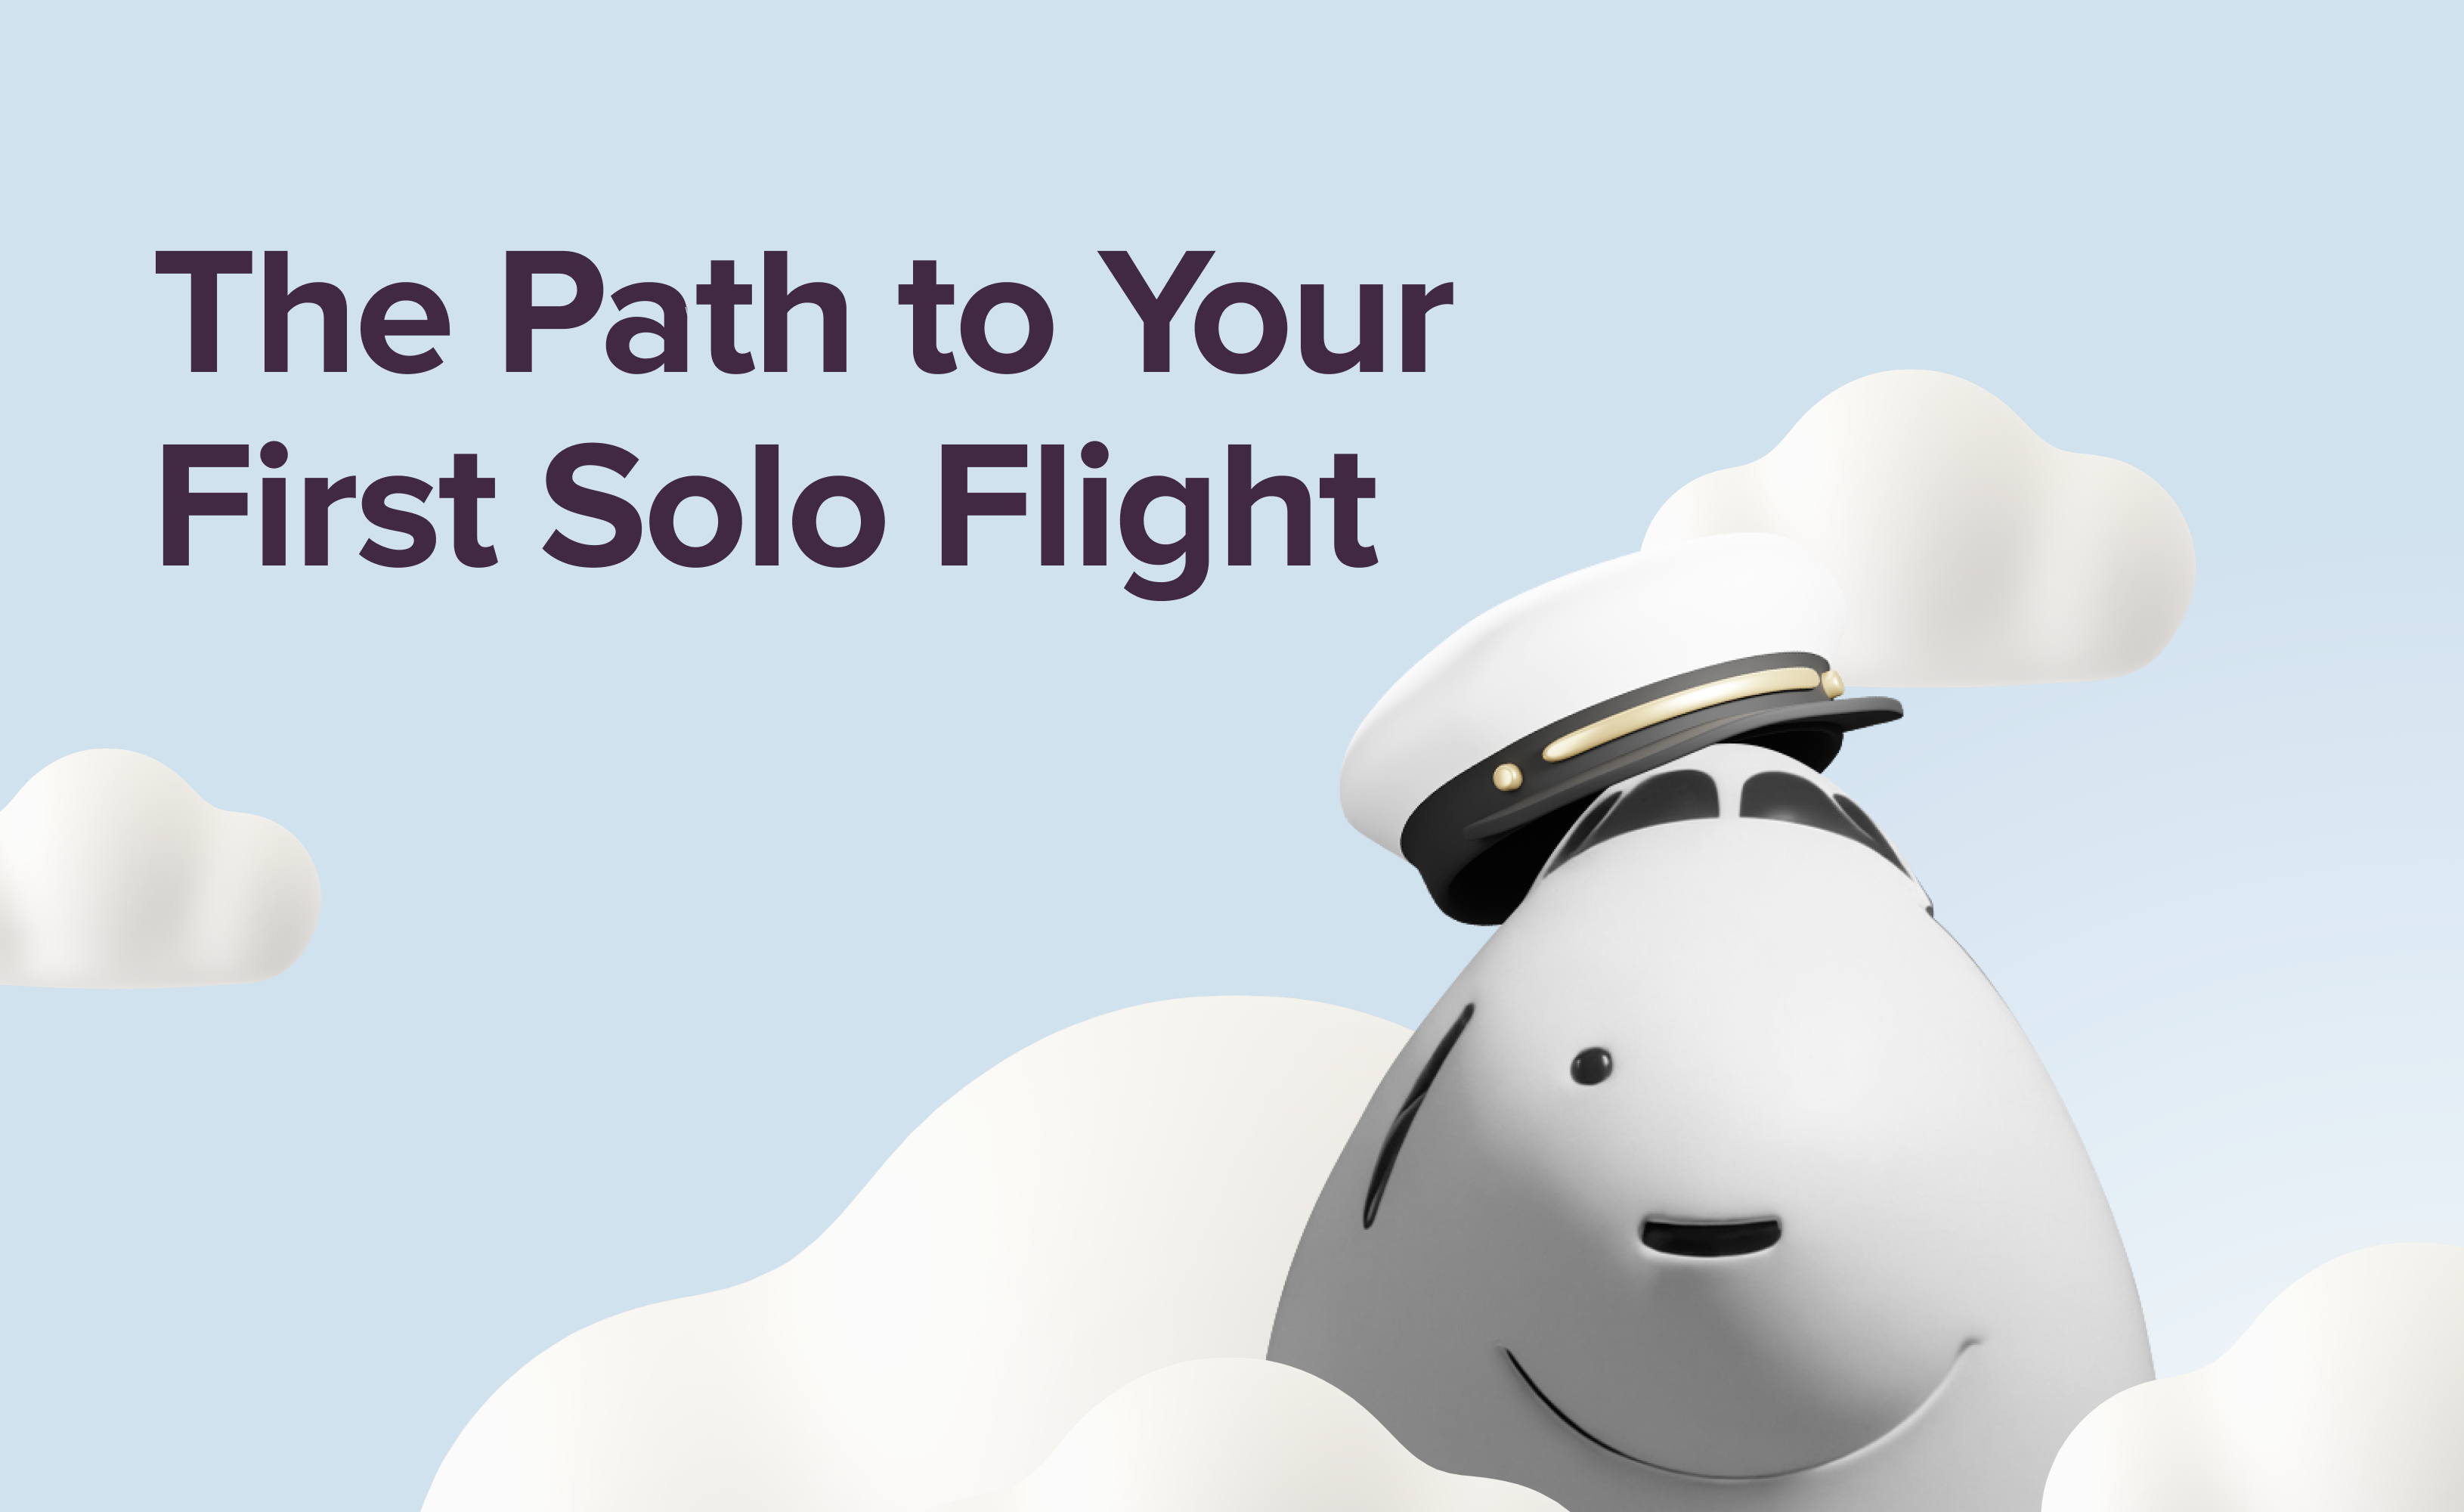 The Path to Your First Solo Flight